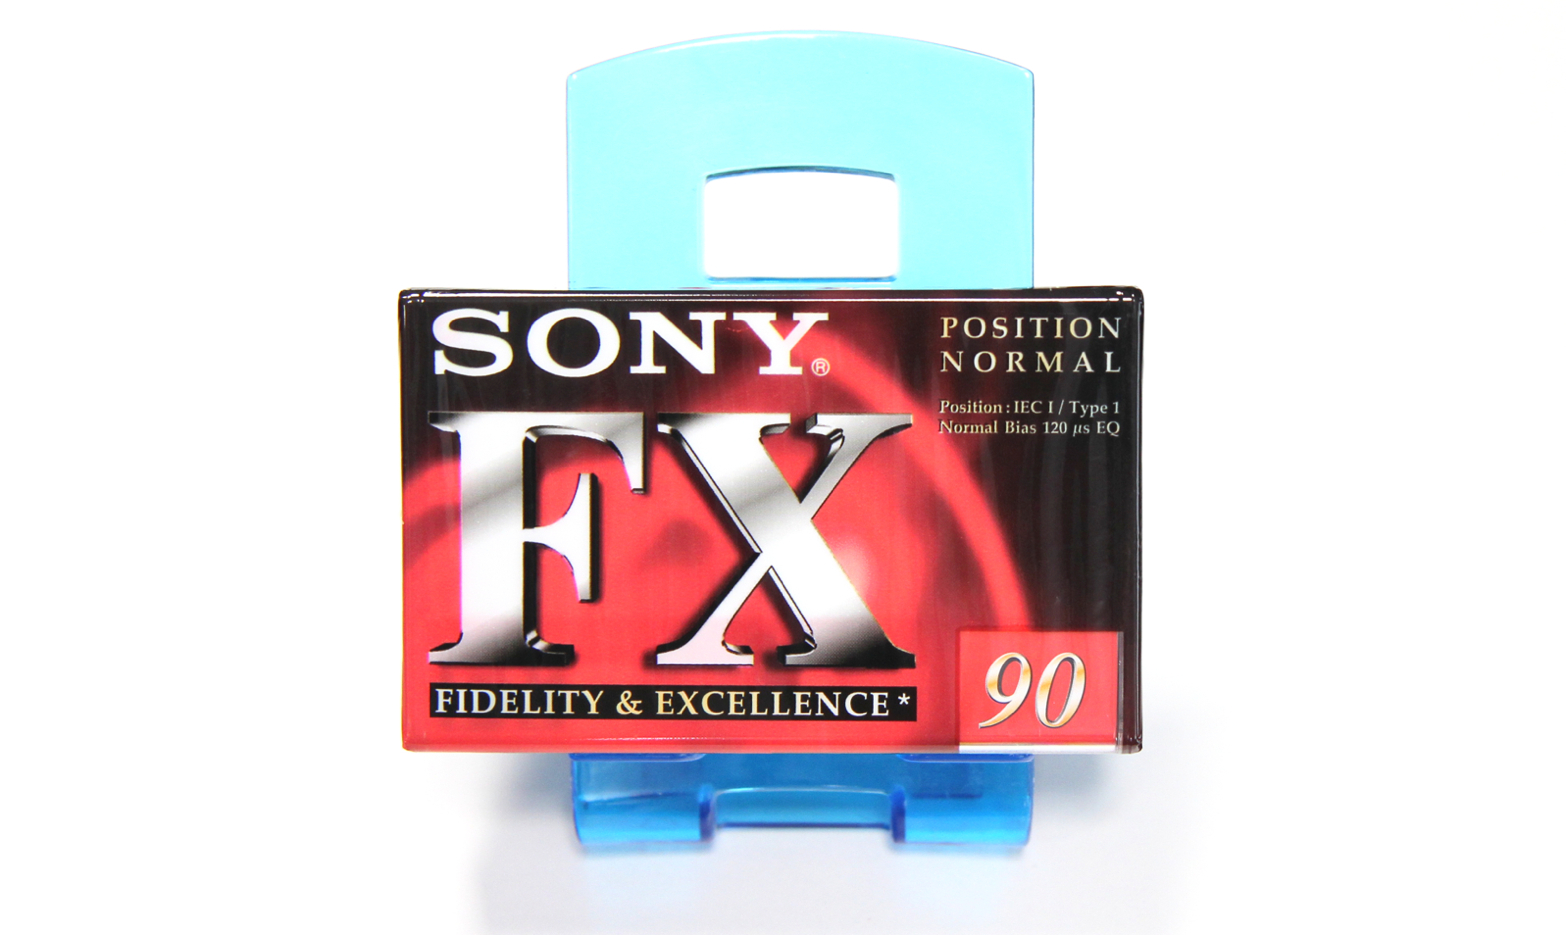 SONY FX-90 Fidelity Excellence